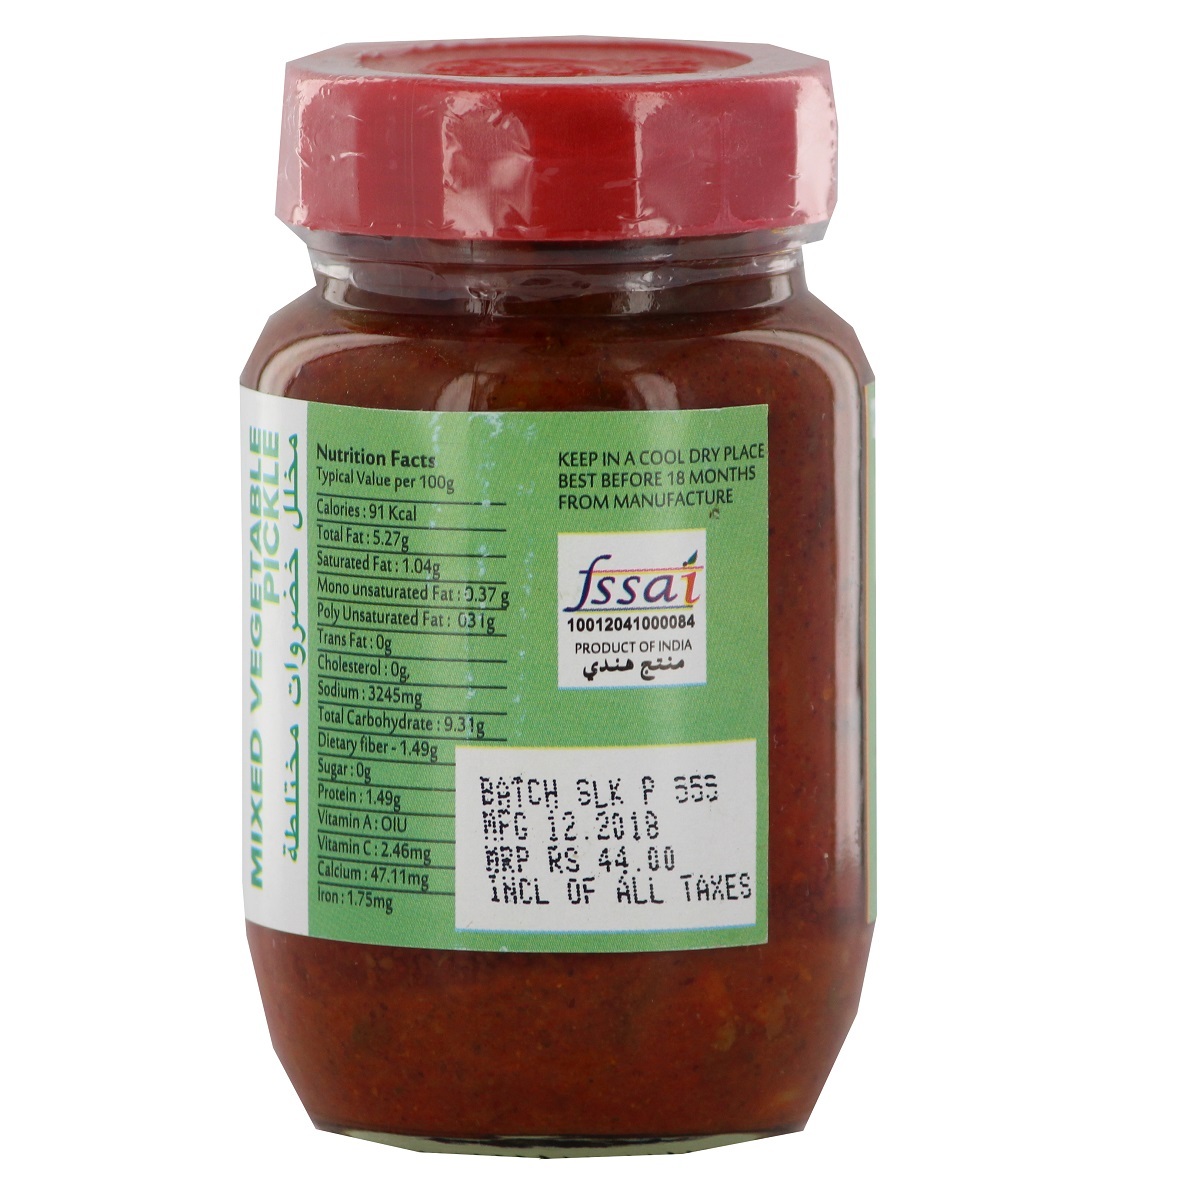 Happy Mixed Vegetable Pickle 200g